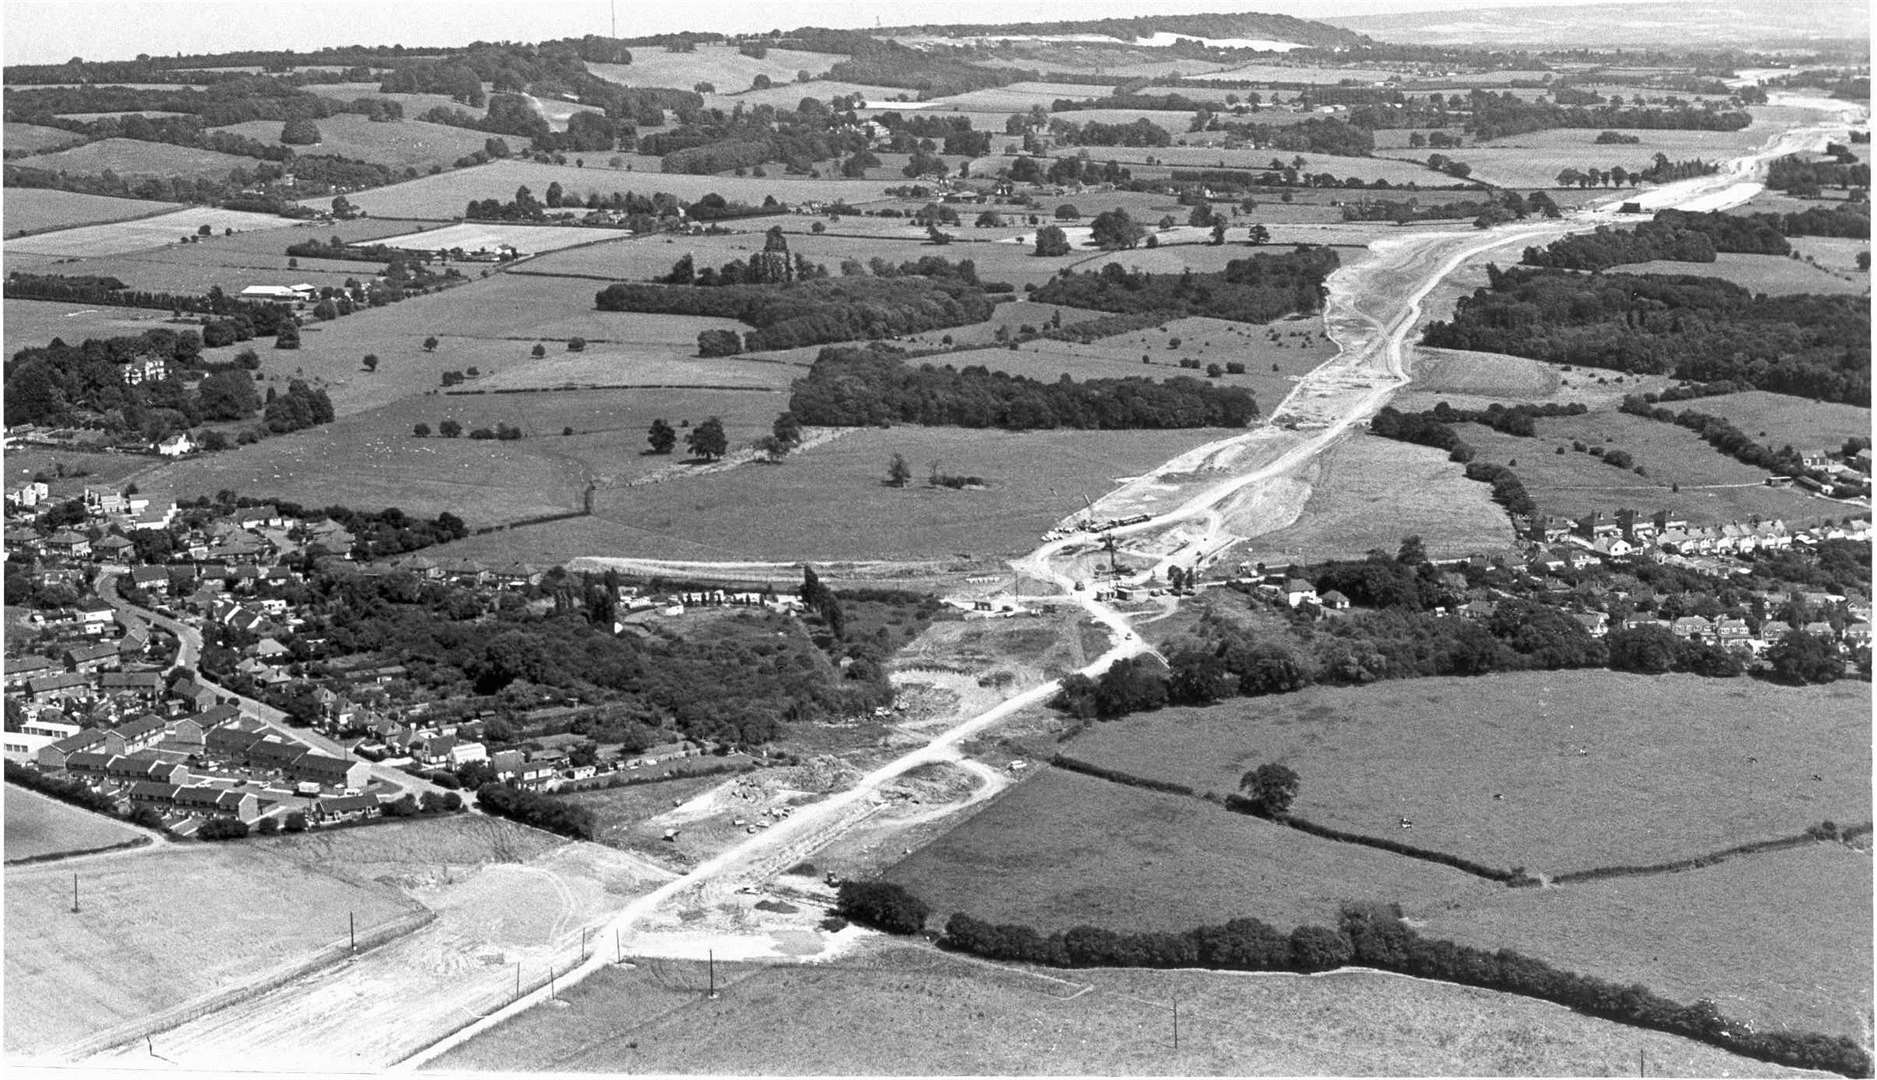 And two years later... the M26 being built near to Wrotham in 1980. Construction of the 10-mile stretch of motorway began in 1977